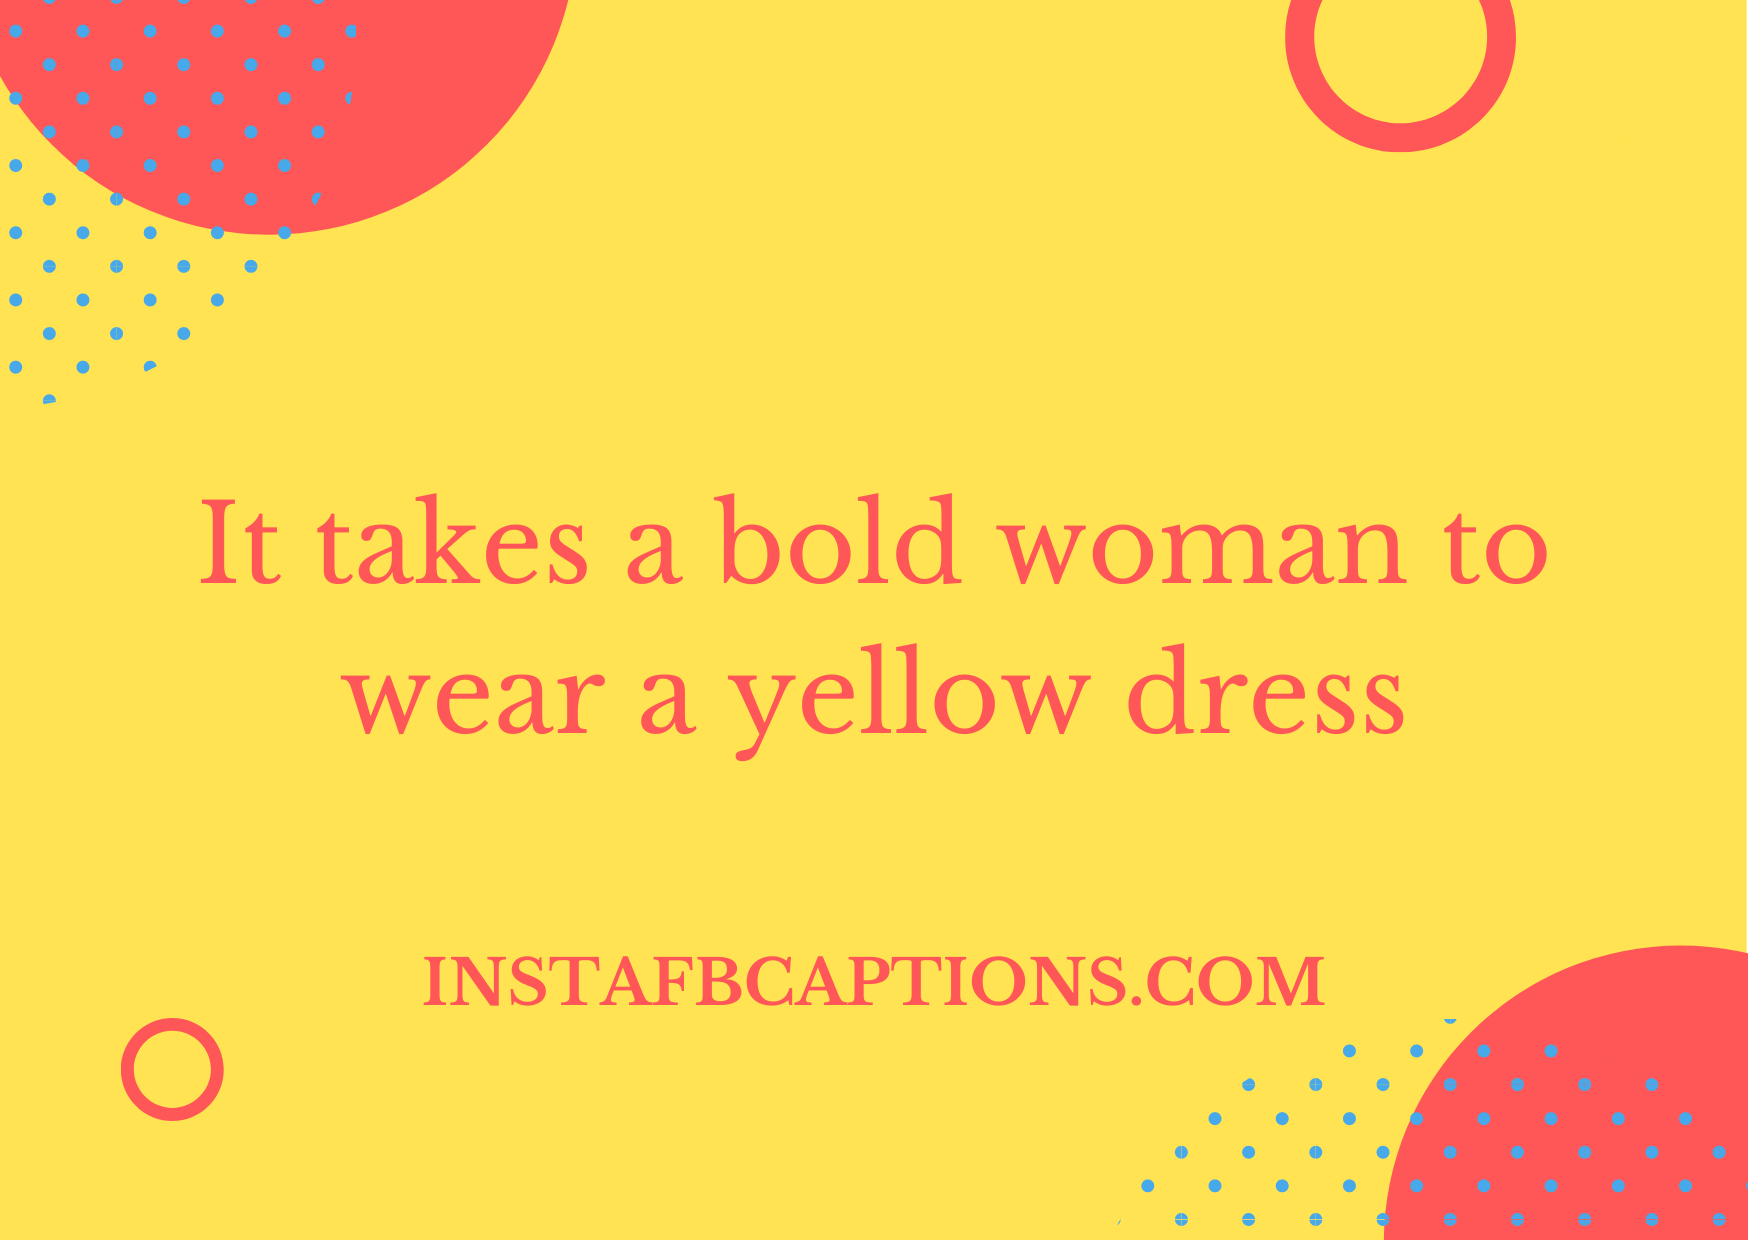 Joyful Yellow Outfit Captions For Couple Pics  - Joyful Yellow Outfit Captions for Couple Pics - Yellow Outfit Captions for Instagram Pics in 2022